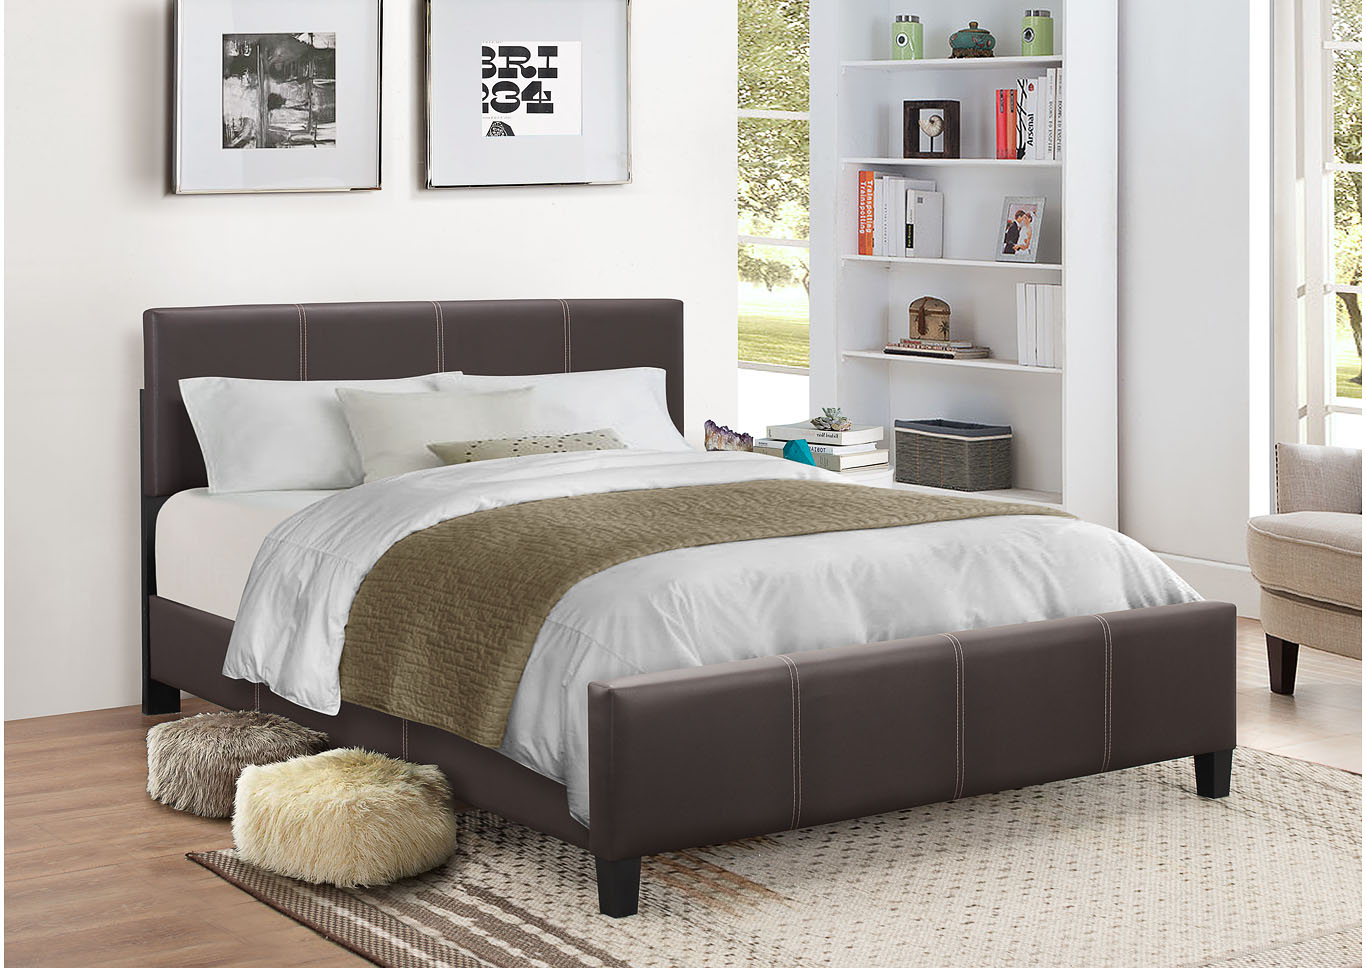 Brown King Bed,Global Trading